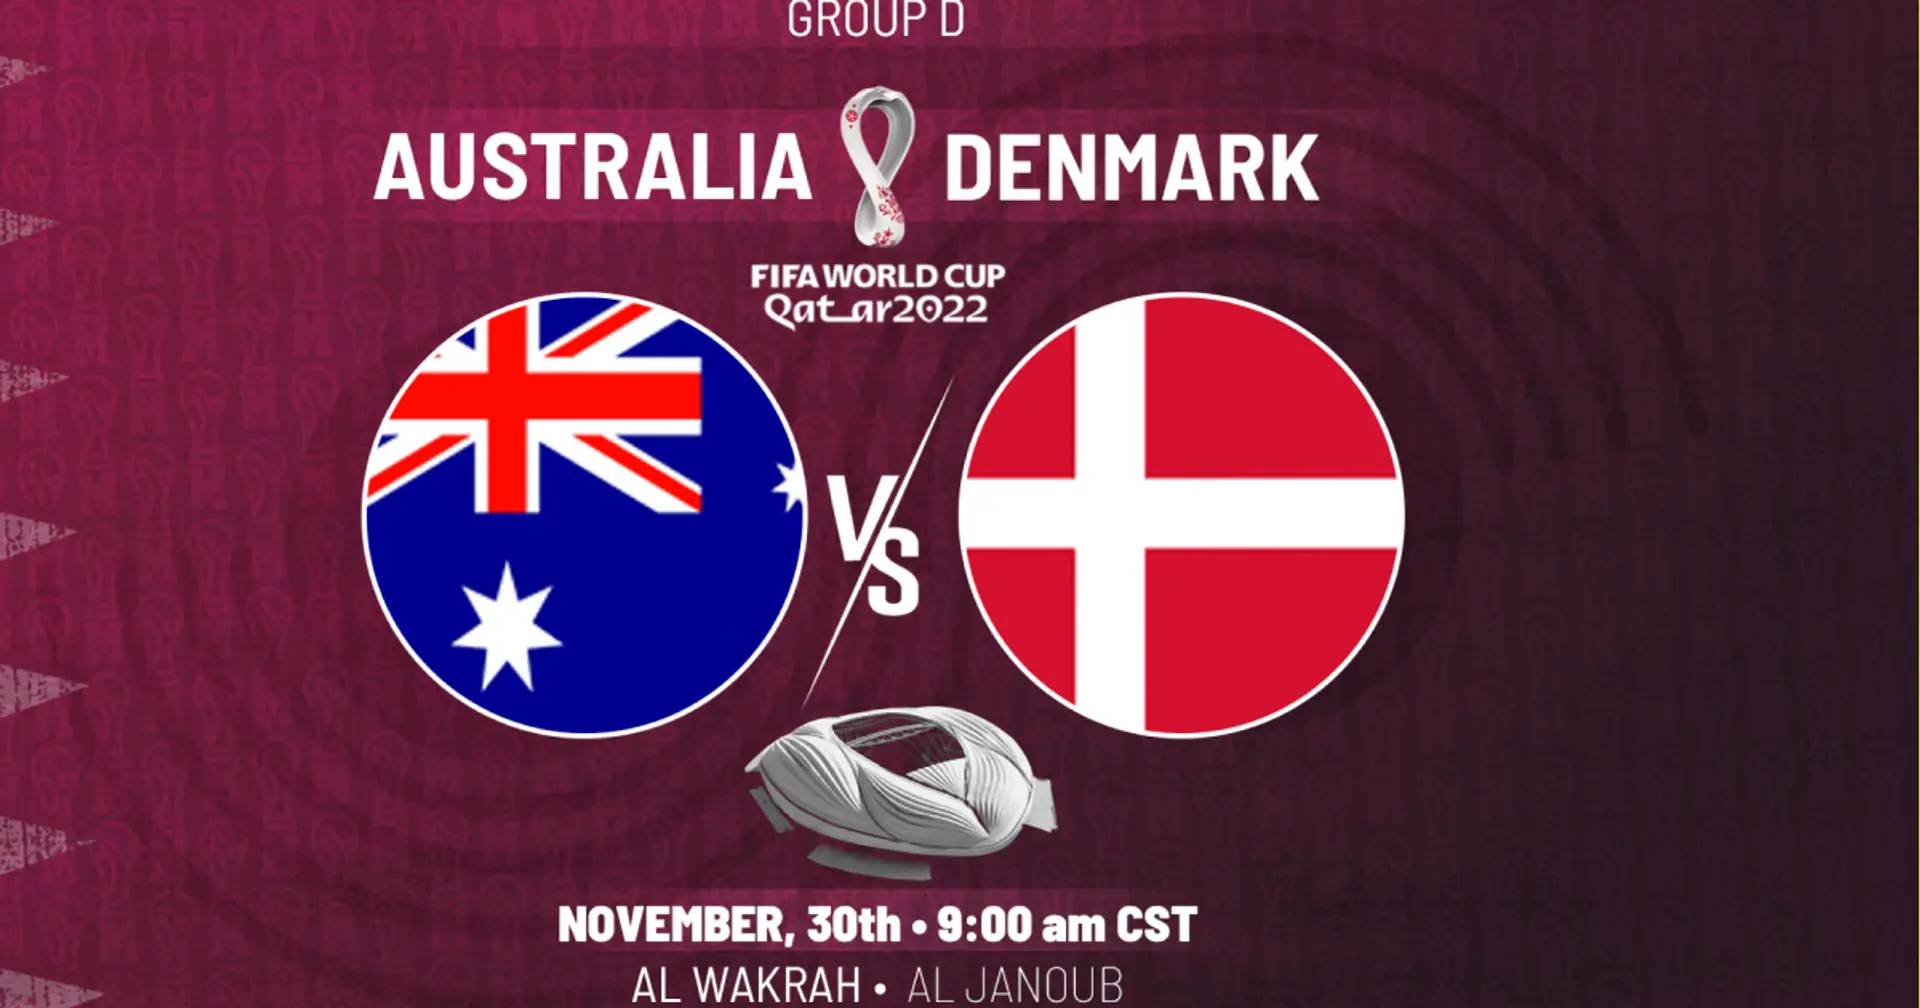 Australia vs Denmark: Official team lineups for the World Cup clash revealed